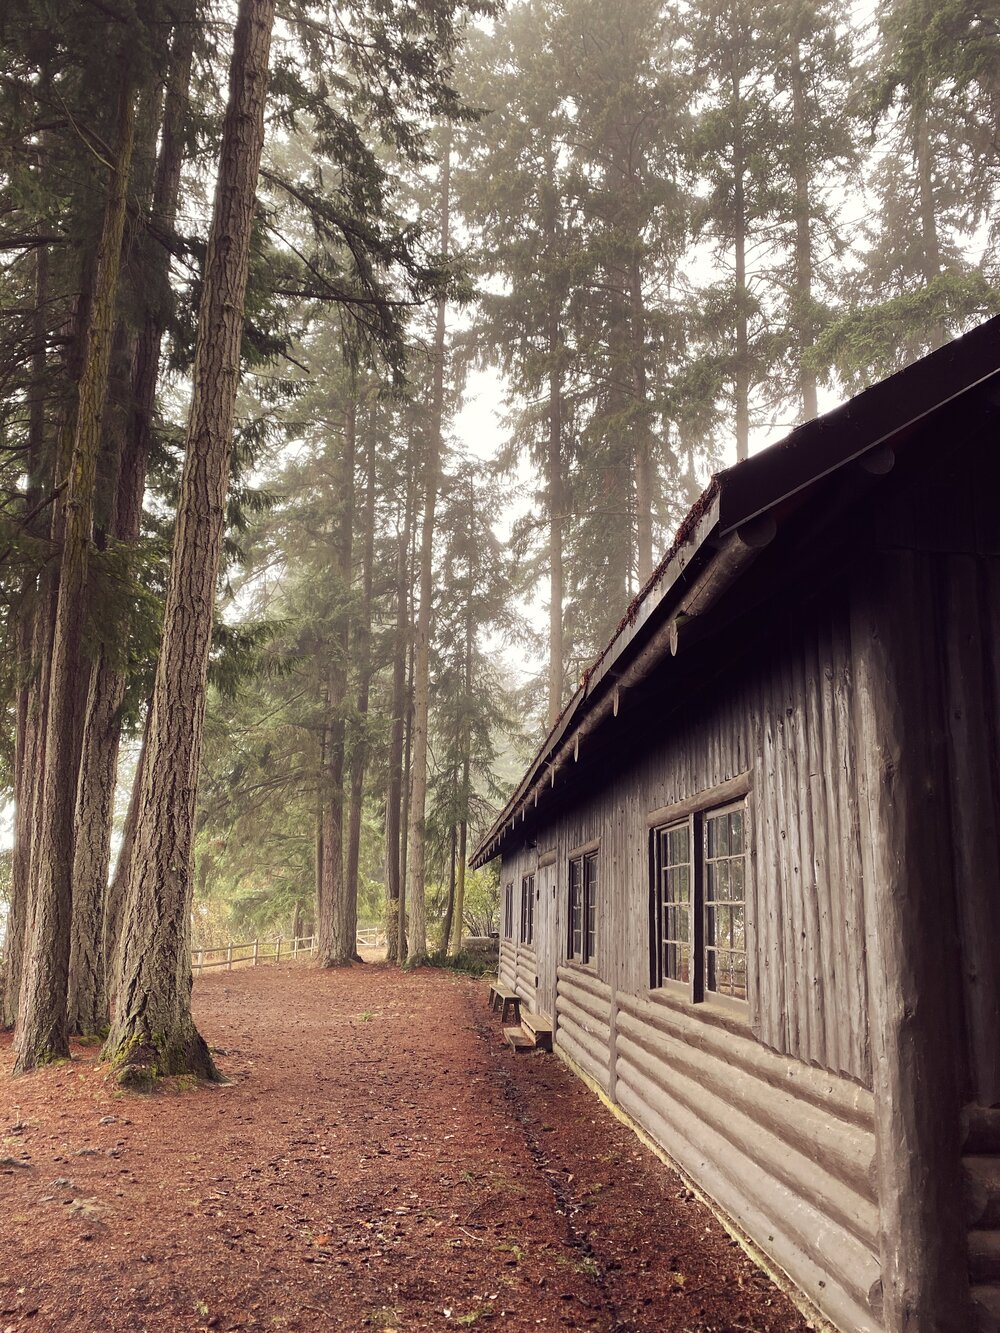 Event Center in the woods at Kitsap Memorial State Park in Washington State